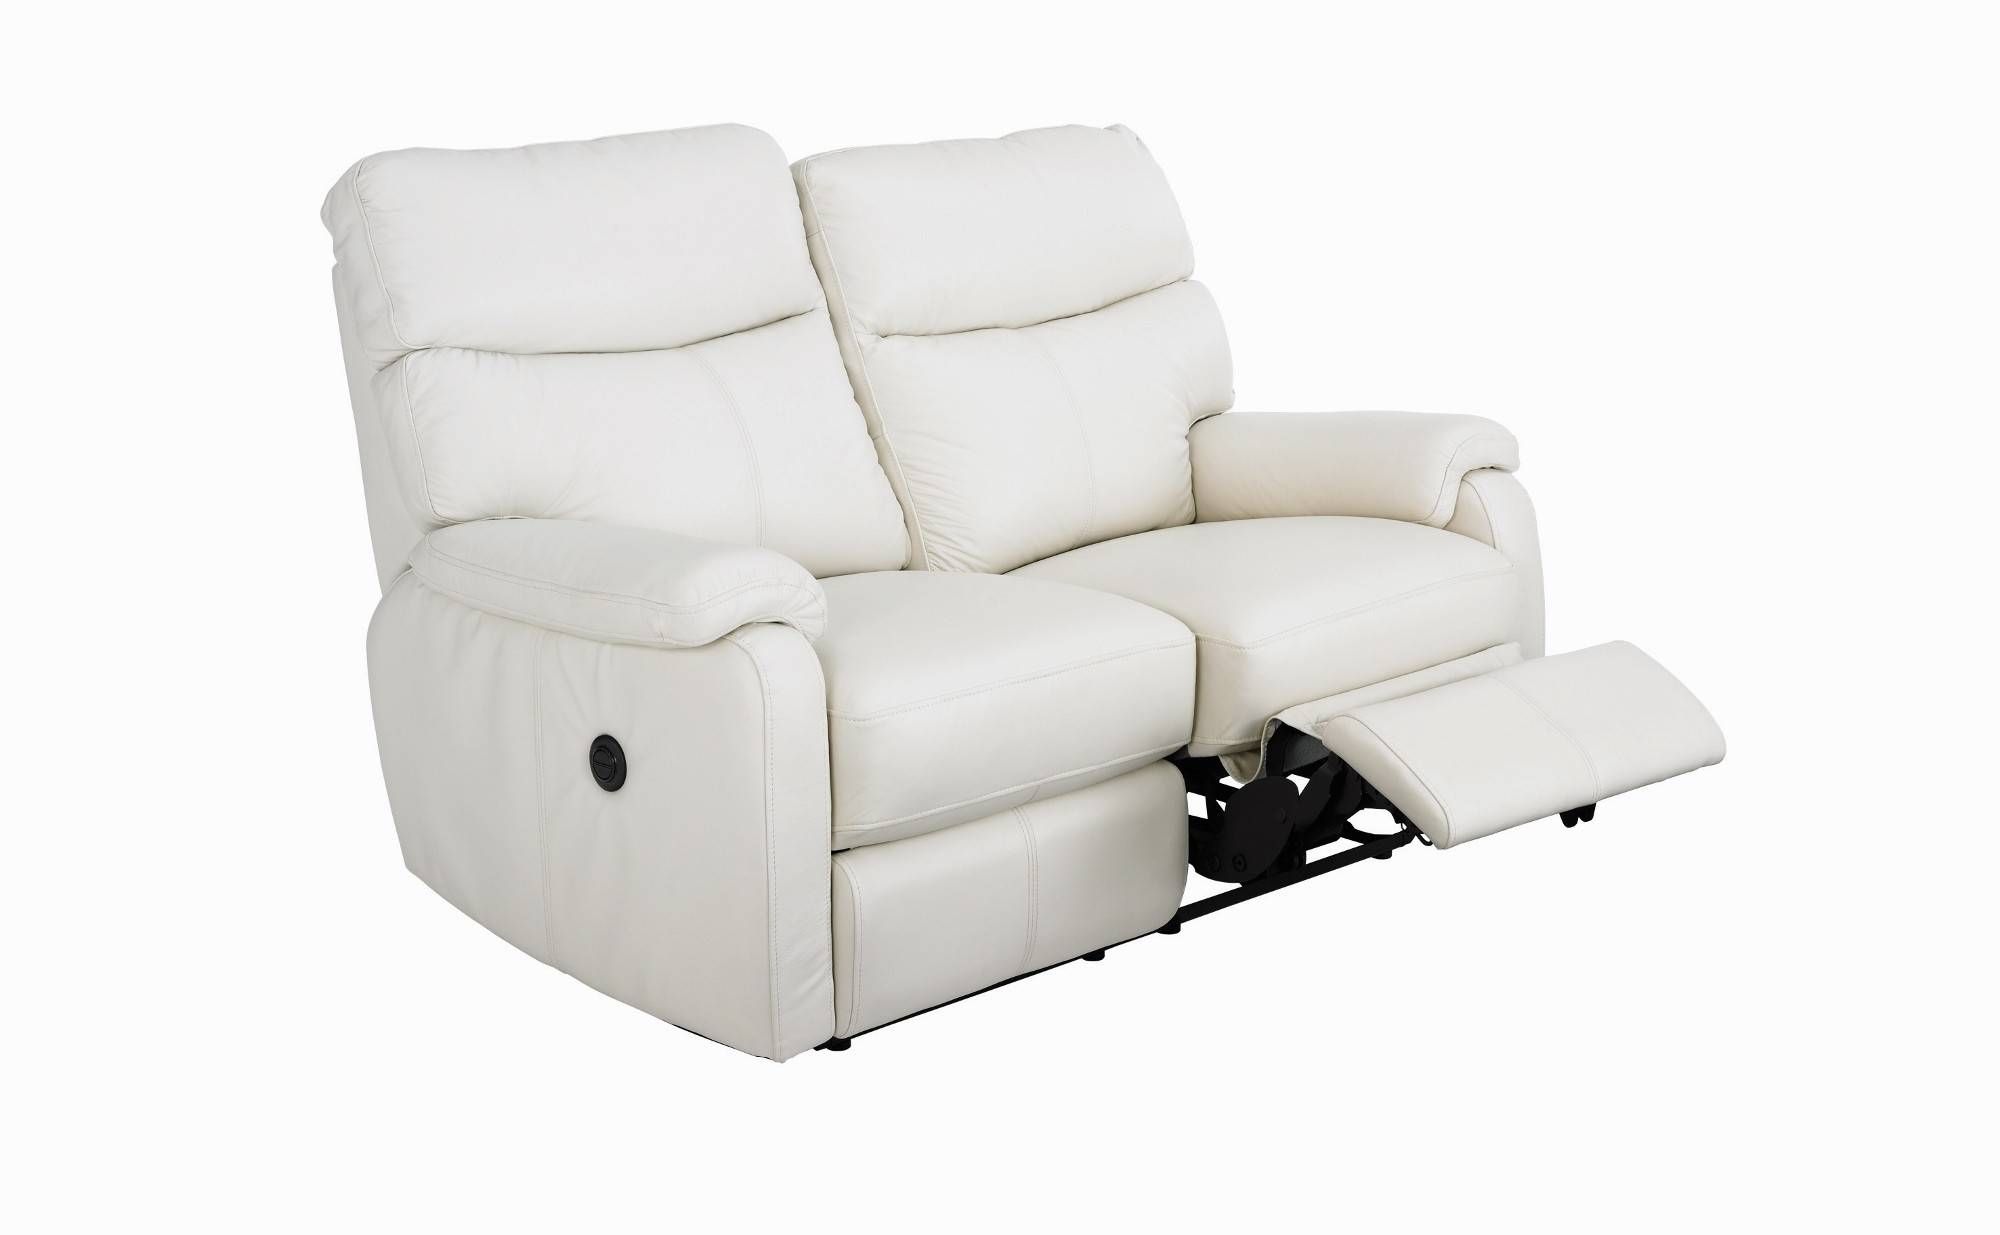 Two Seater Recliner Leather Sofa – Leather Sectional Sofa In 2 Seater Recliner Leather Sofas (View 11 of 30)